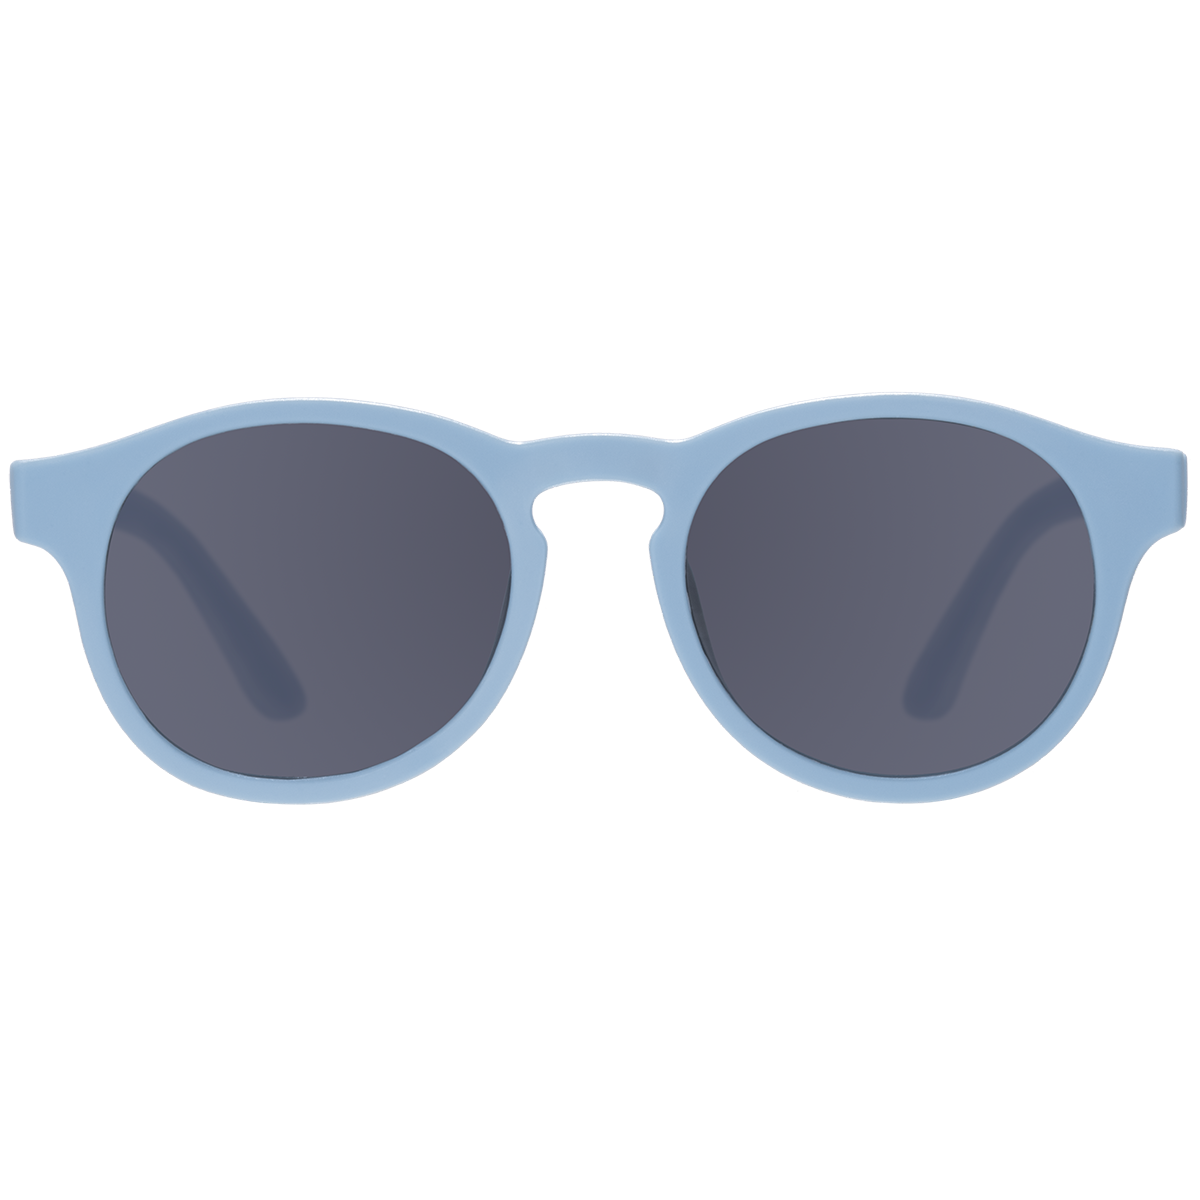 Up in the Air Blue Keyhole Babiator Sunglasses